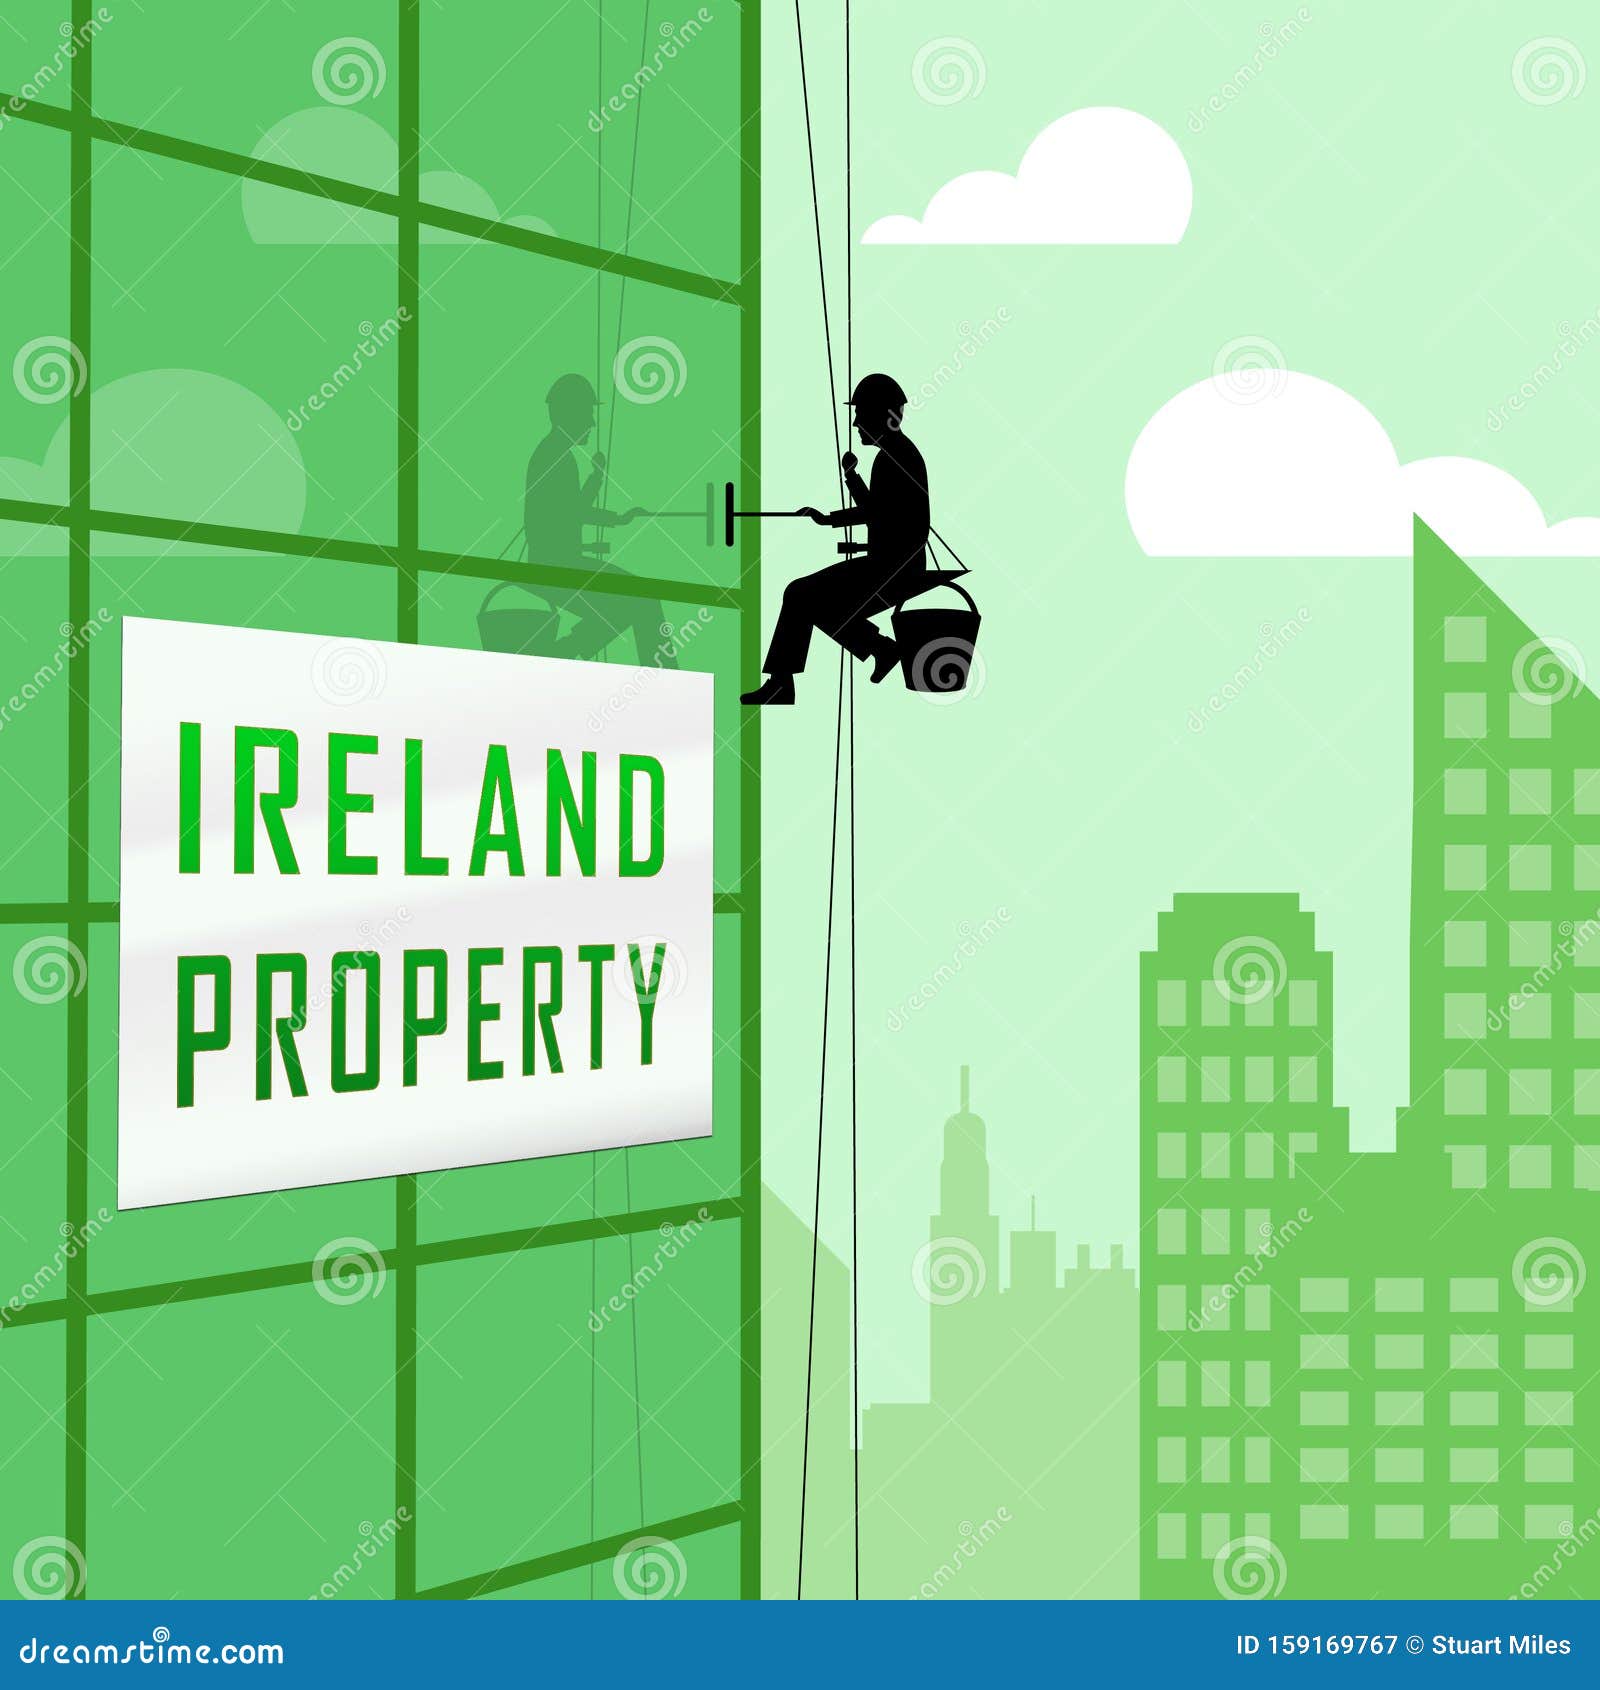 Ireland Property Or Real Estate Building Depicts Buying Or ...